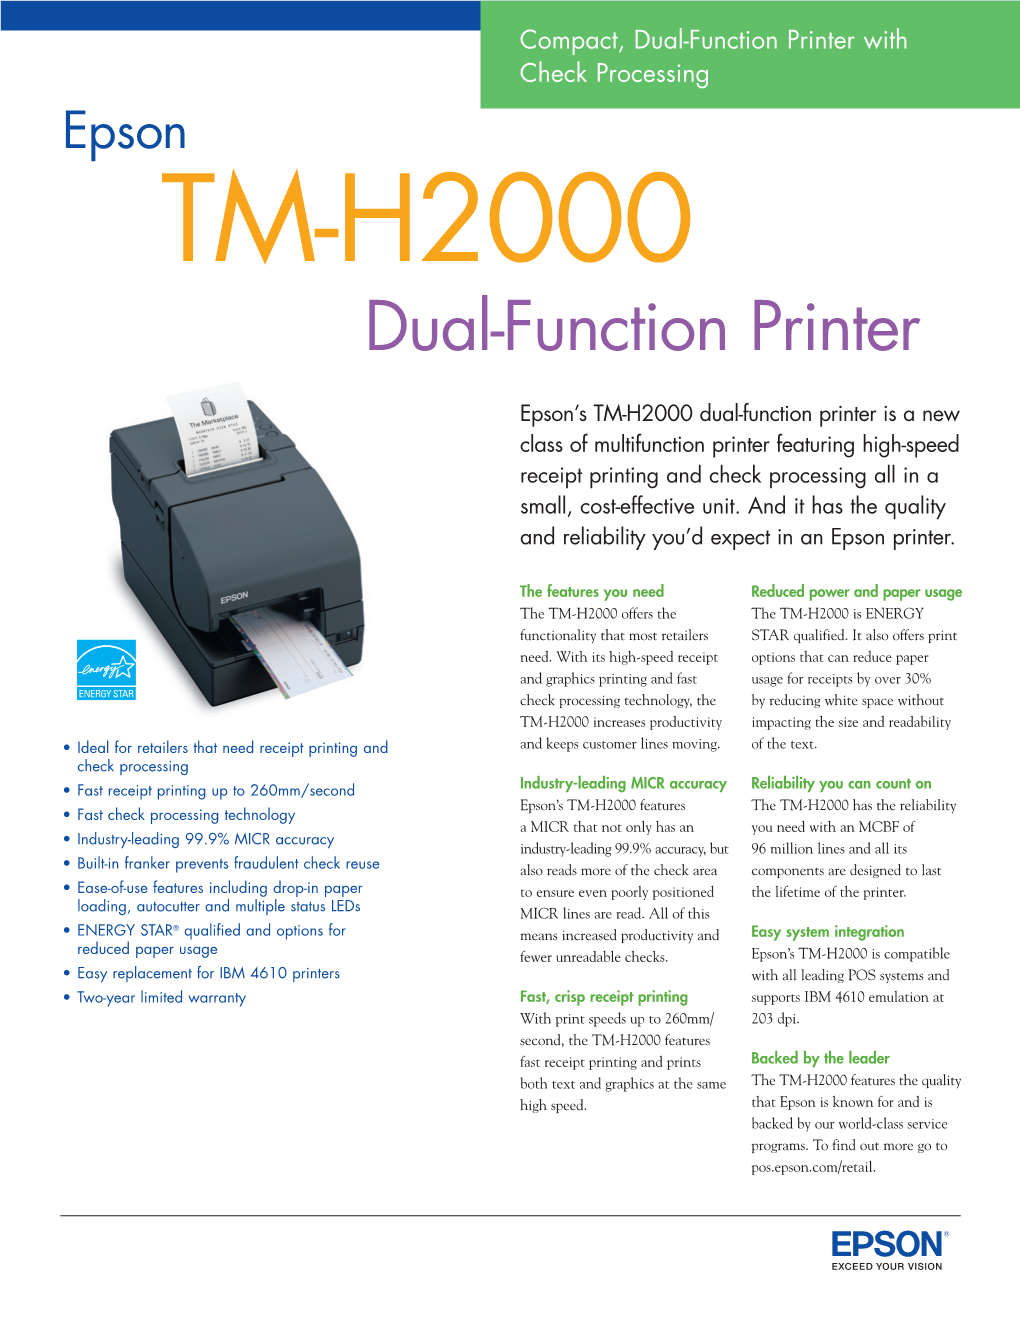 Dual-Function Printer with Check Processing Epson TM-H2000 Dual-Function Printer